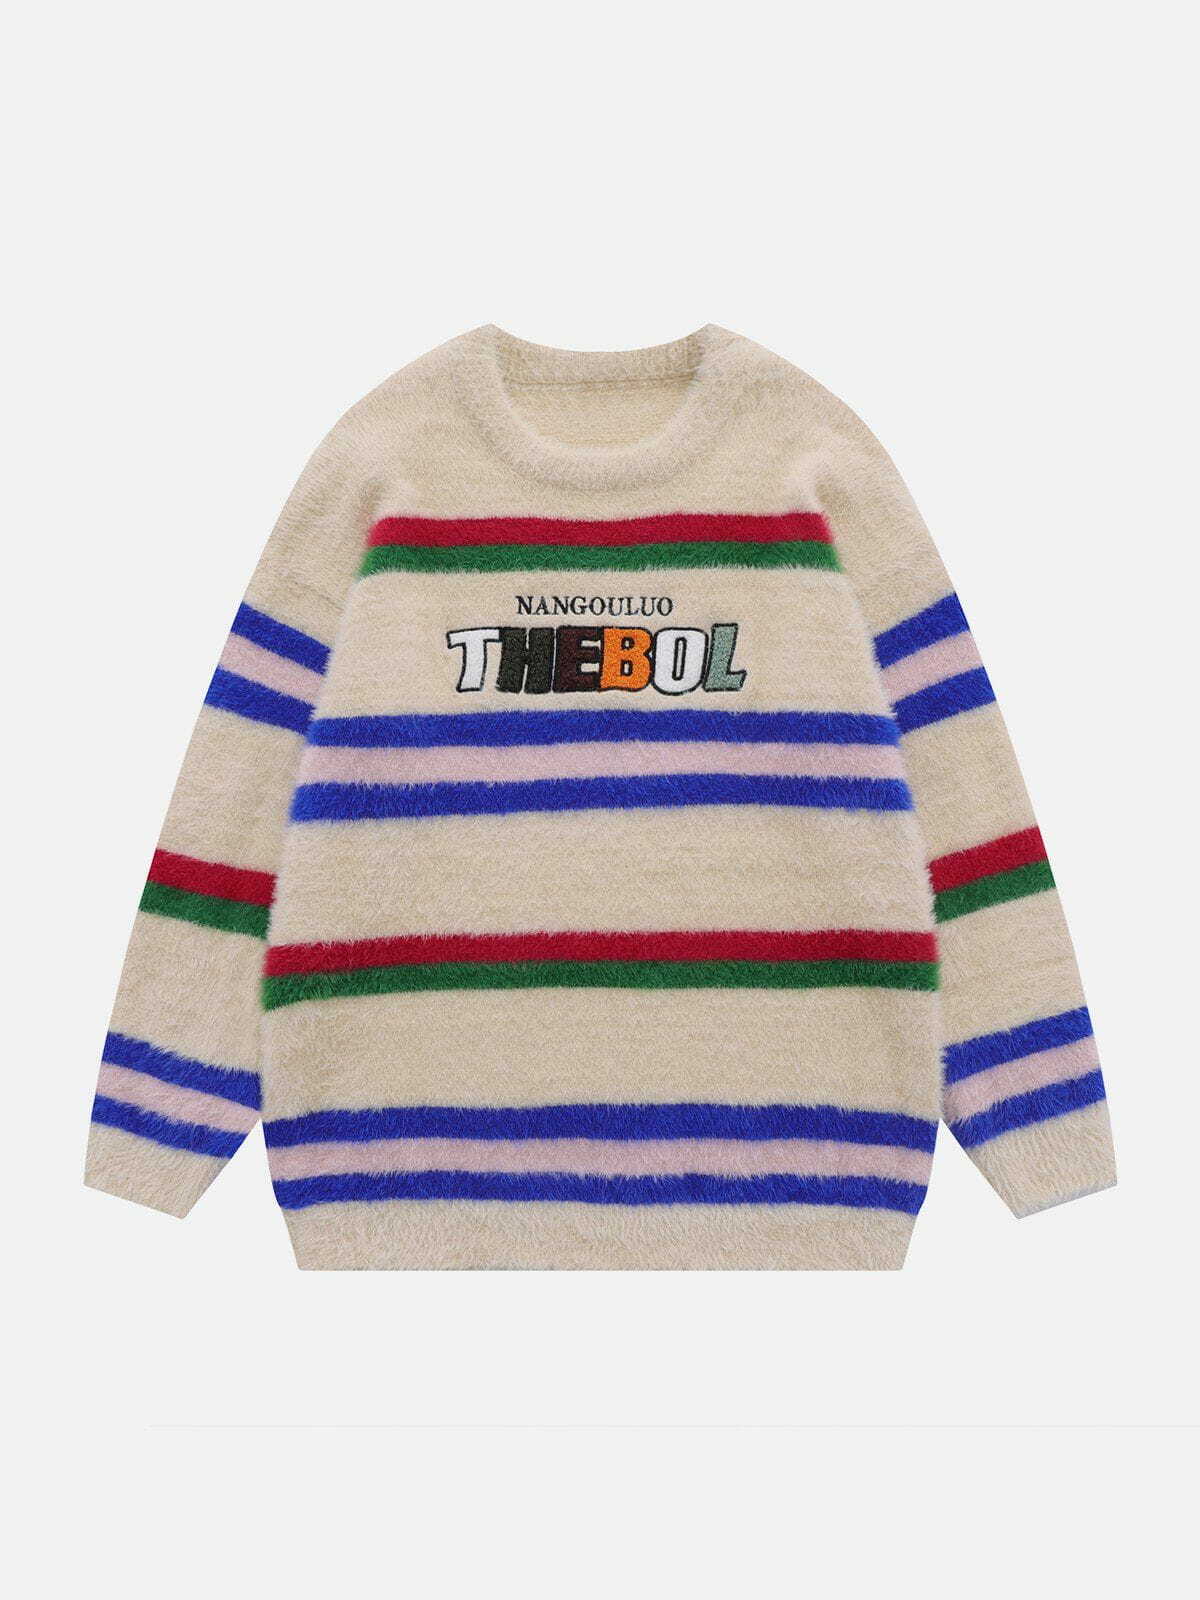 colorful striped letter sweater edgy retro streetwear statement 2690